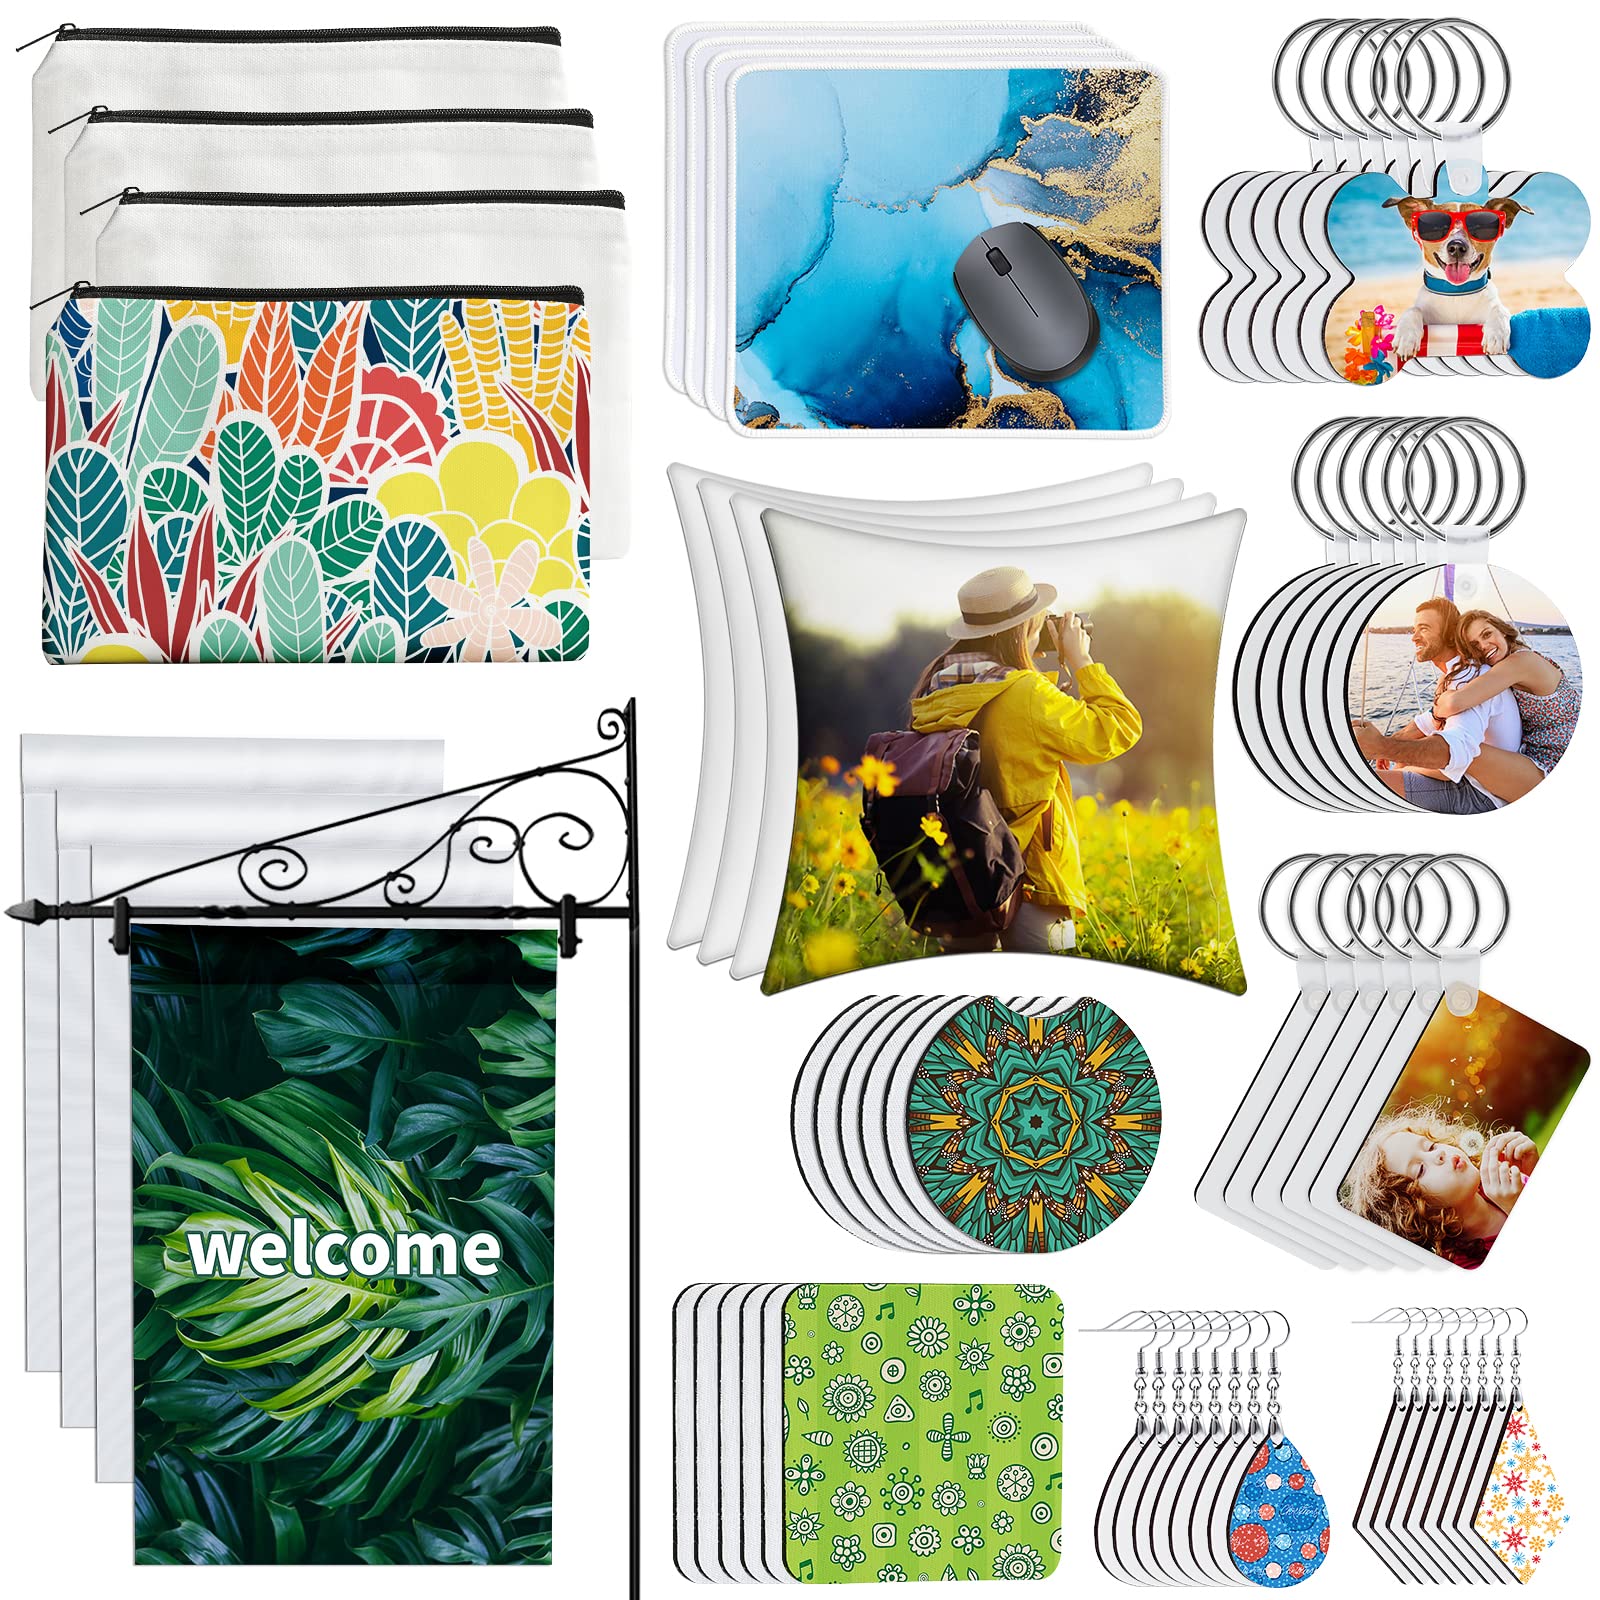 114Pcs Sublimation Blanks Products, Sublimation Blanks Set Including DIY  Blank Makeup Bag, Keychain, Earring, Pillow Cover, Mouse Pad, Coaster,  Garden Flag for Sublimation Transfer Mother's Day Gifts